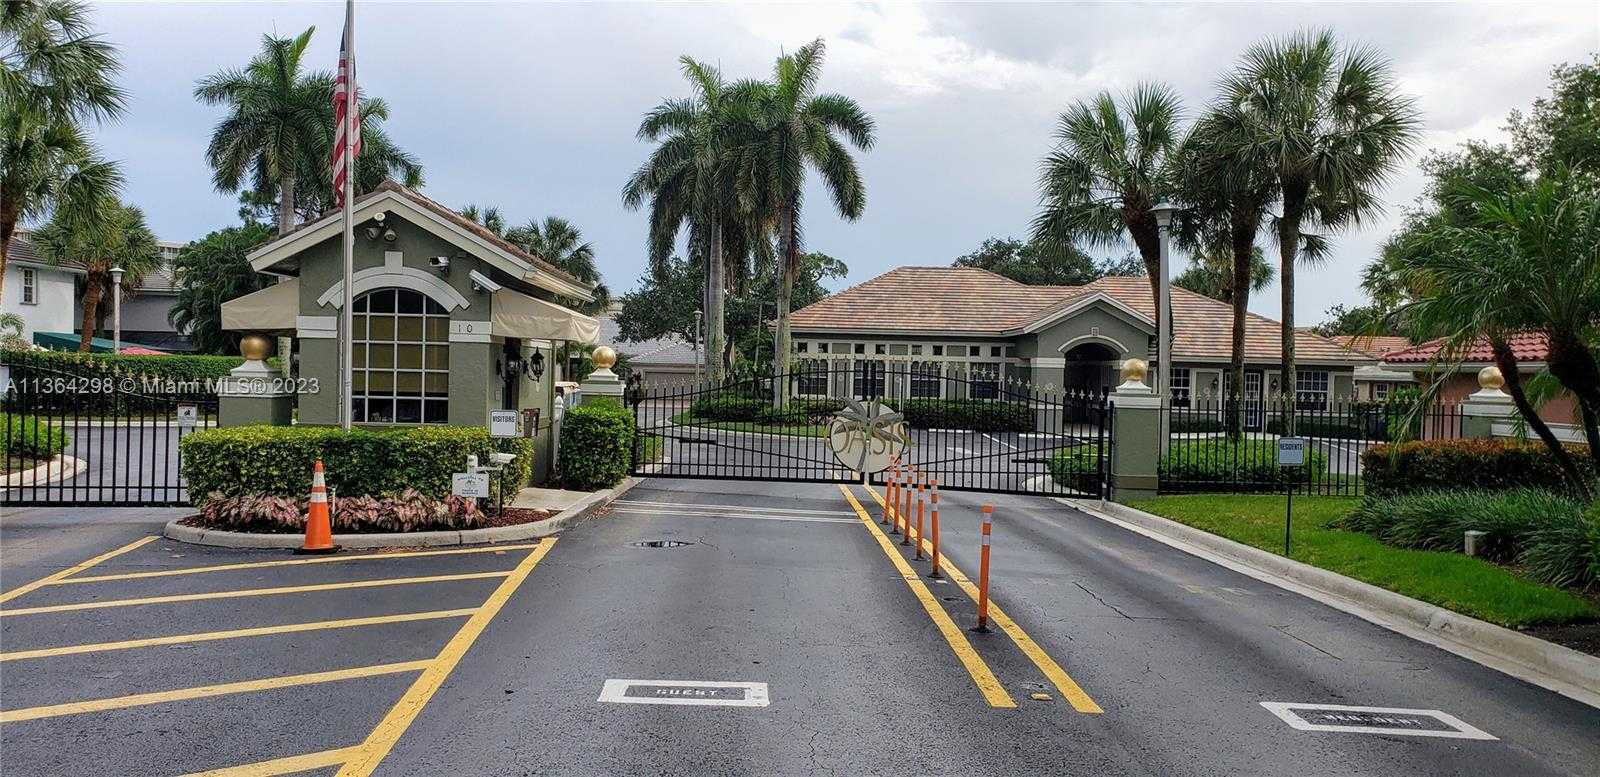 House in Coconut Creek Park, Florida 11642979